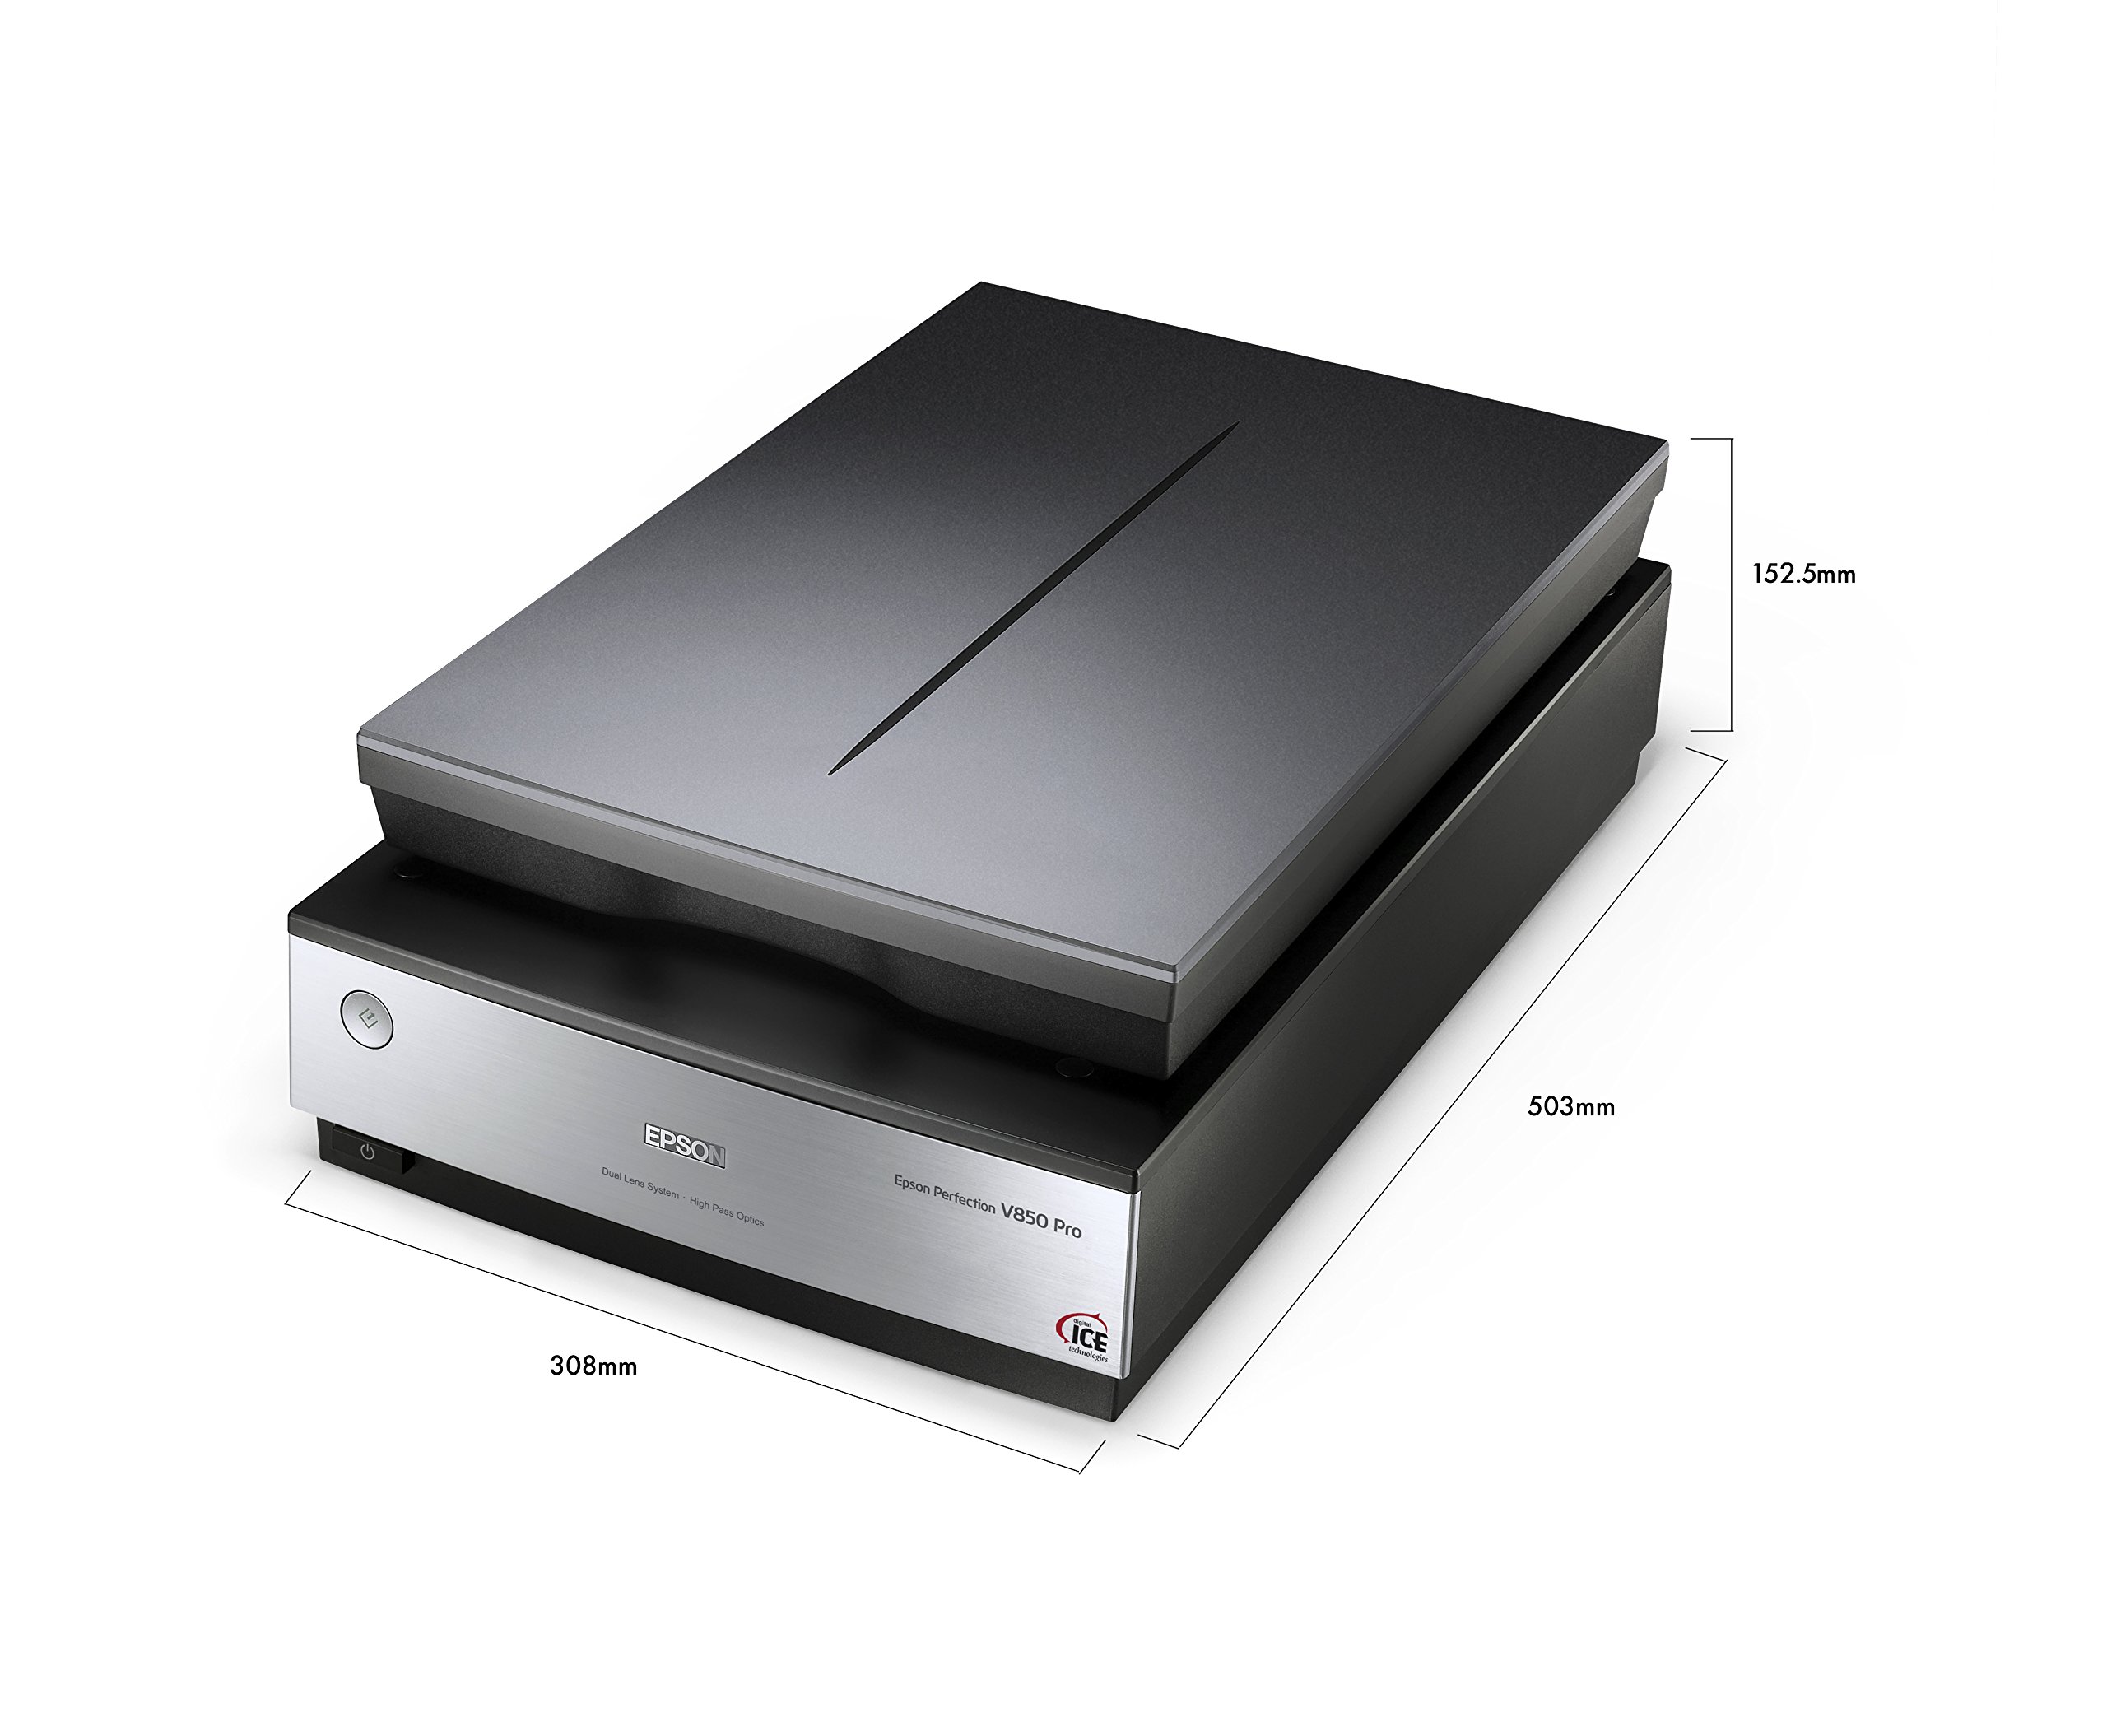 Epson Perfection V850 Pro A4 Flatbed Scanner with ReadyScan LED Technology - 6400 x 9600 dpi